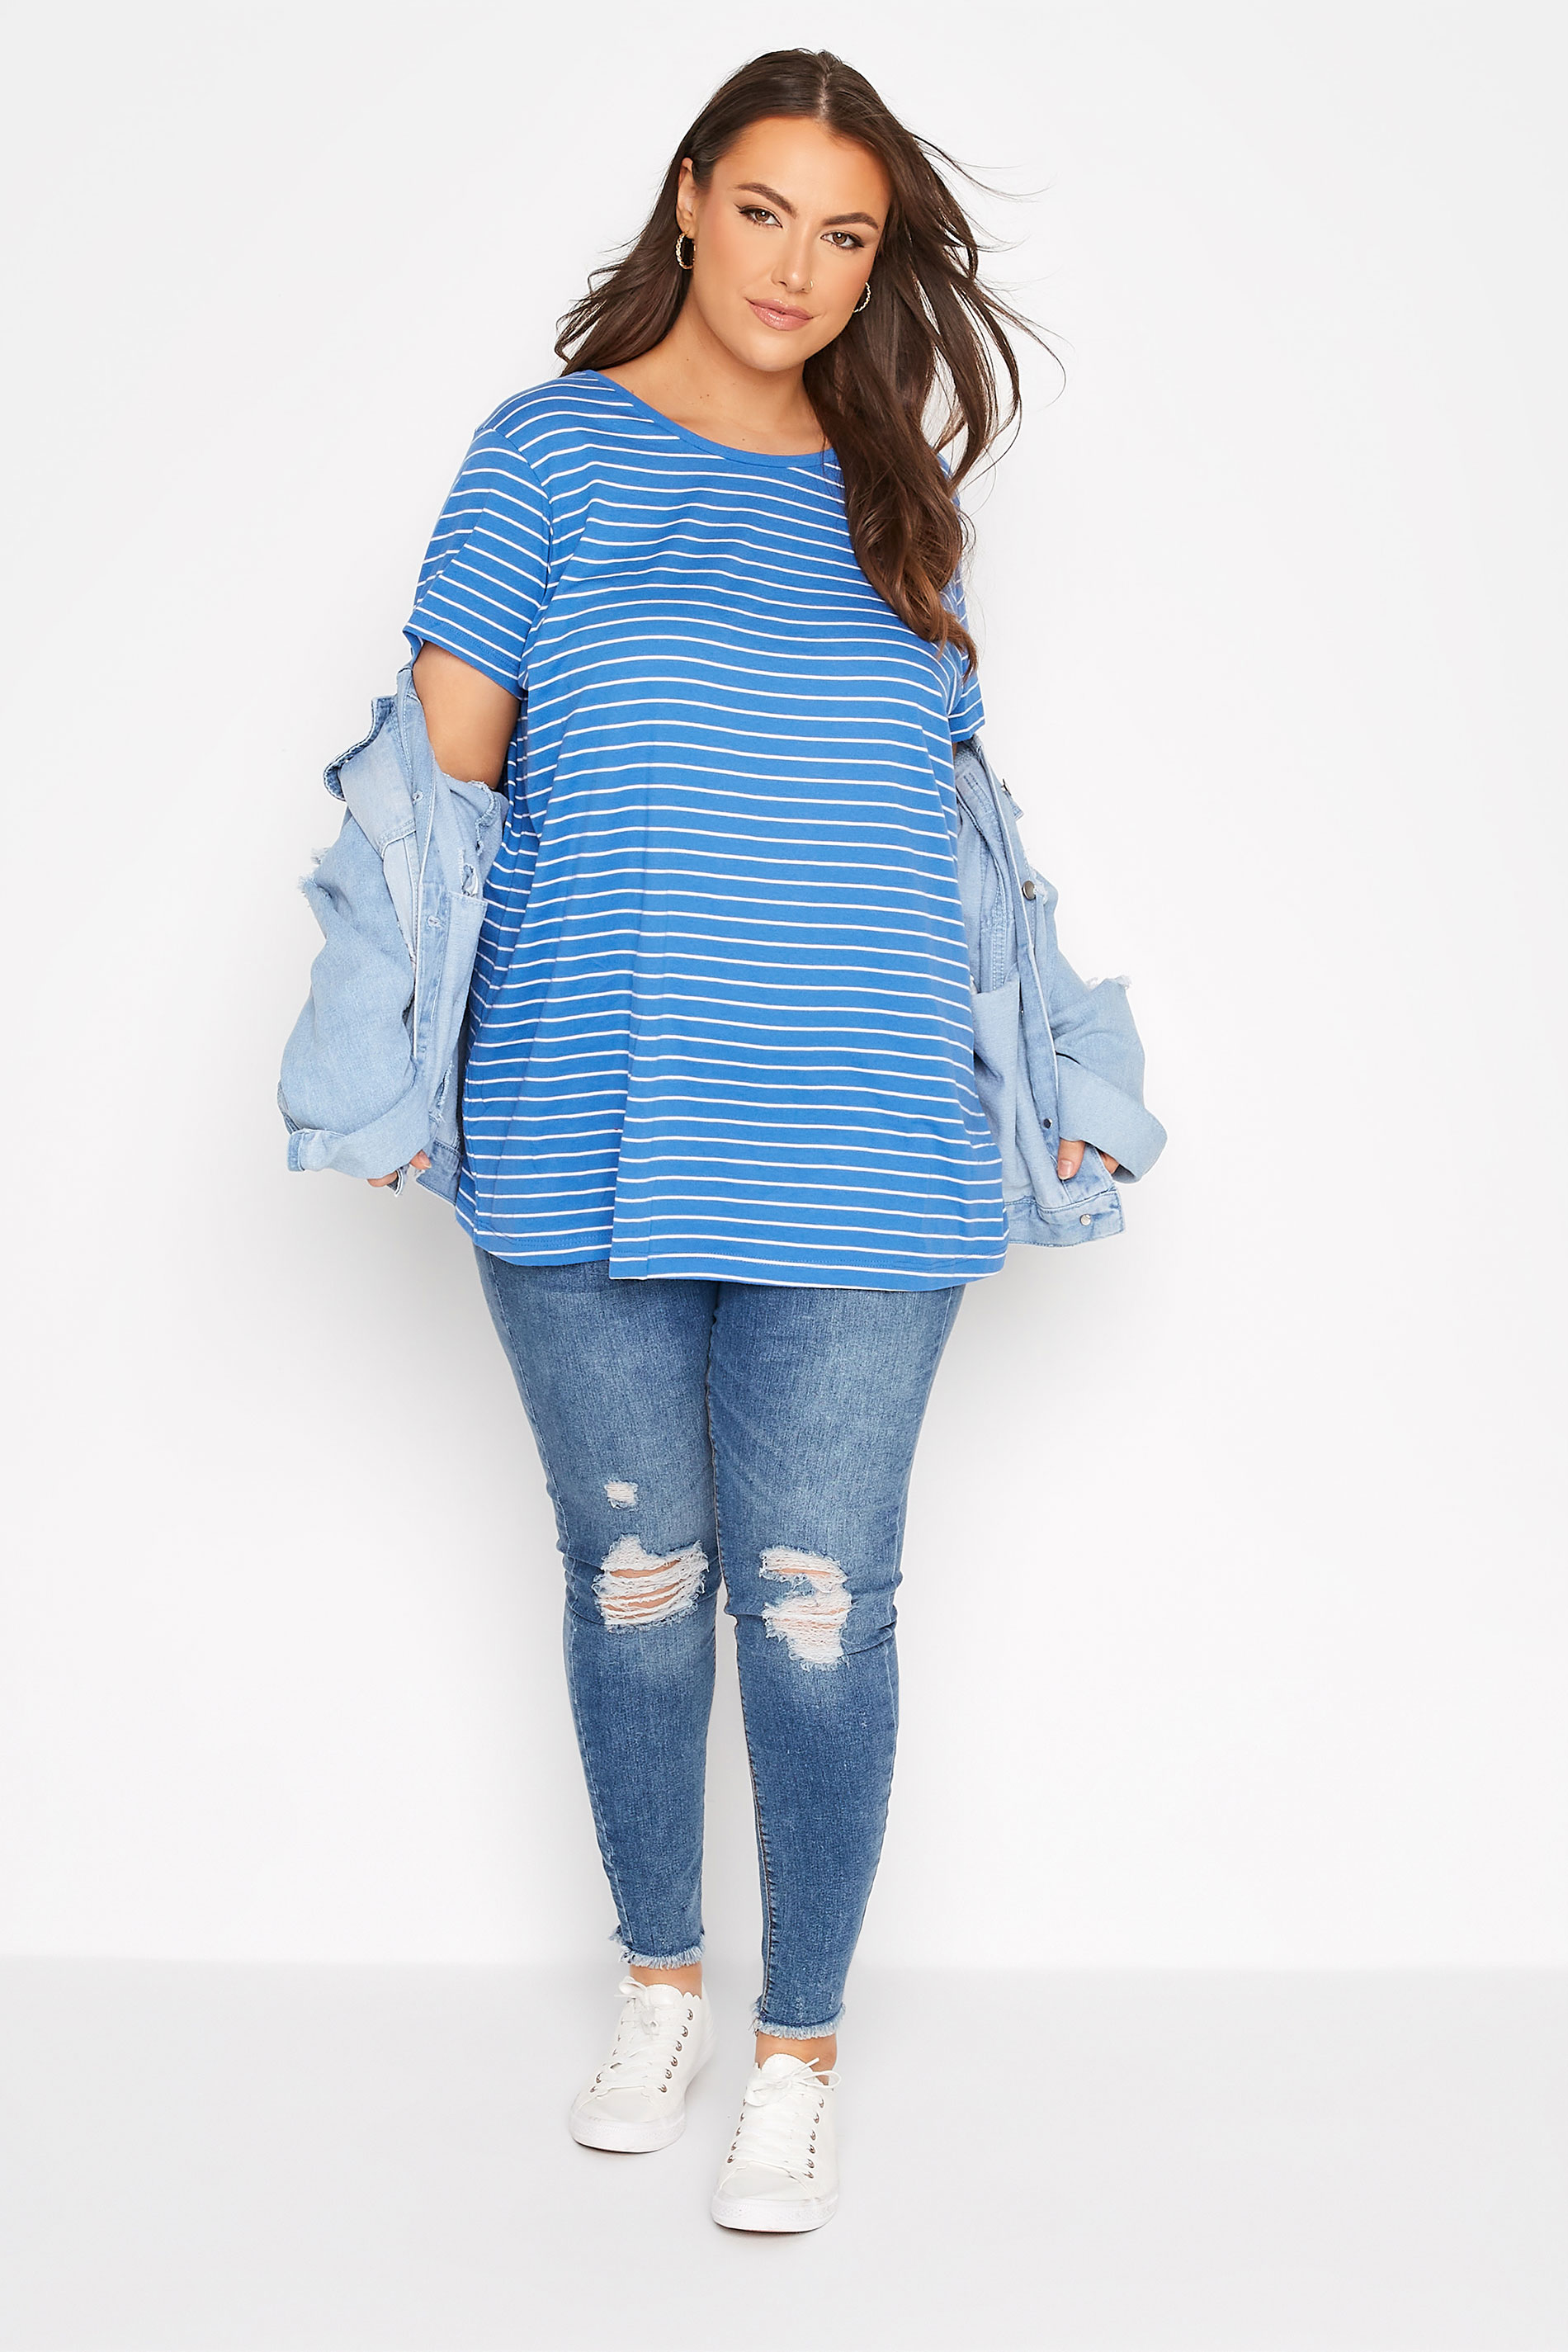 Grande taille  Tops Grande taille  T-Shirts | T-Shirt Bleu Fines Rayures - HJ37812